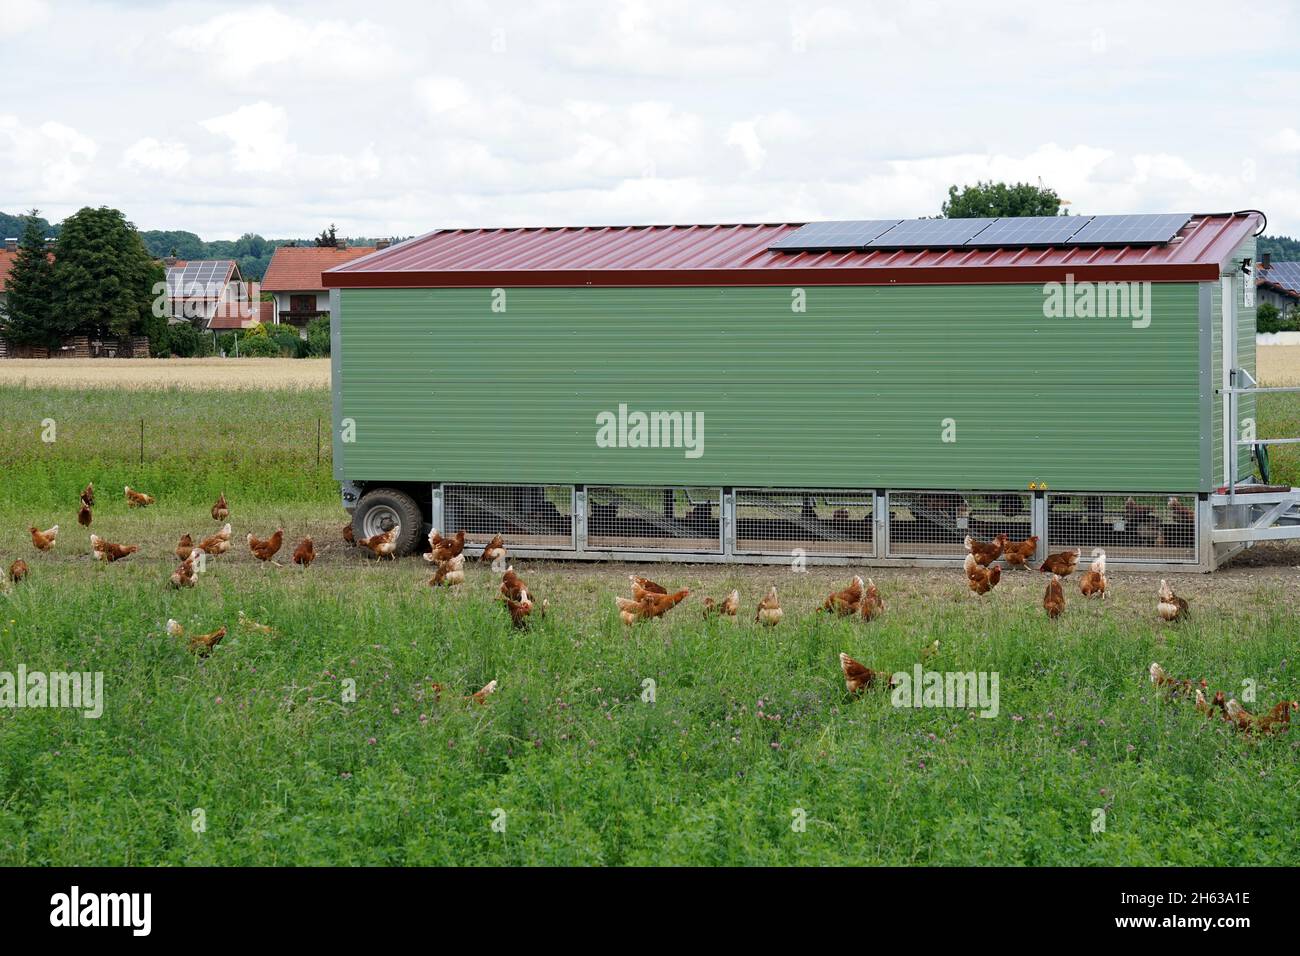 germany,bavaria,upper bavaria,altöttting district,agriculture,meadow,mobile henhouse,free-range chickens Stock Photo